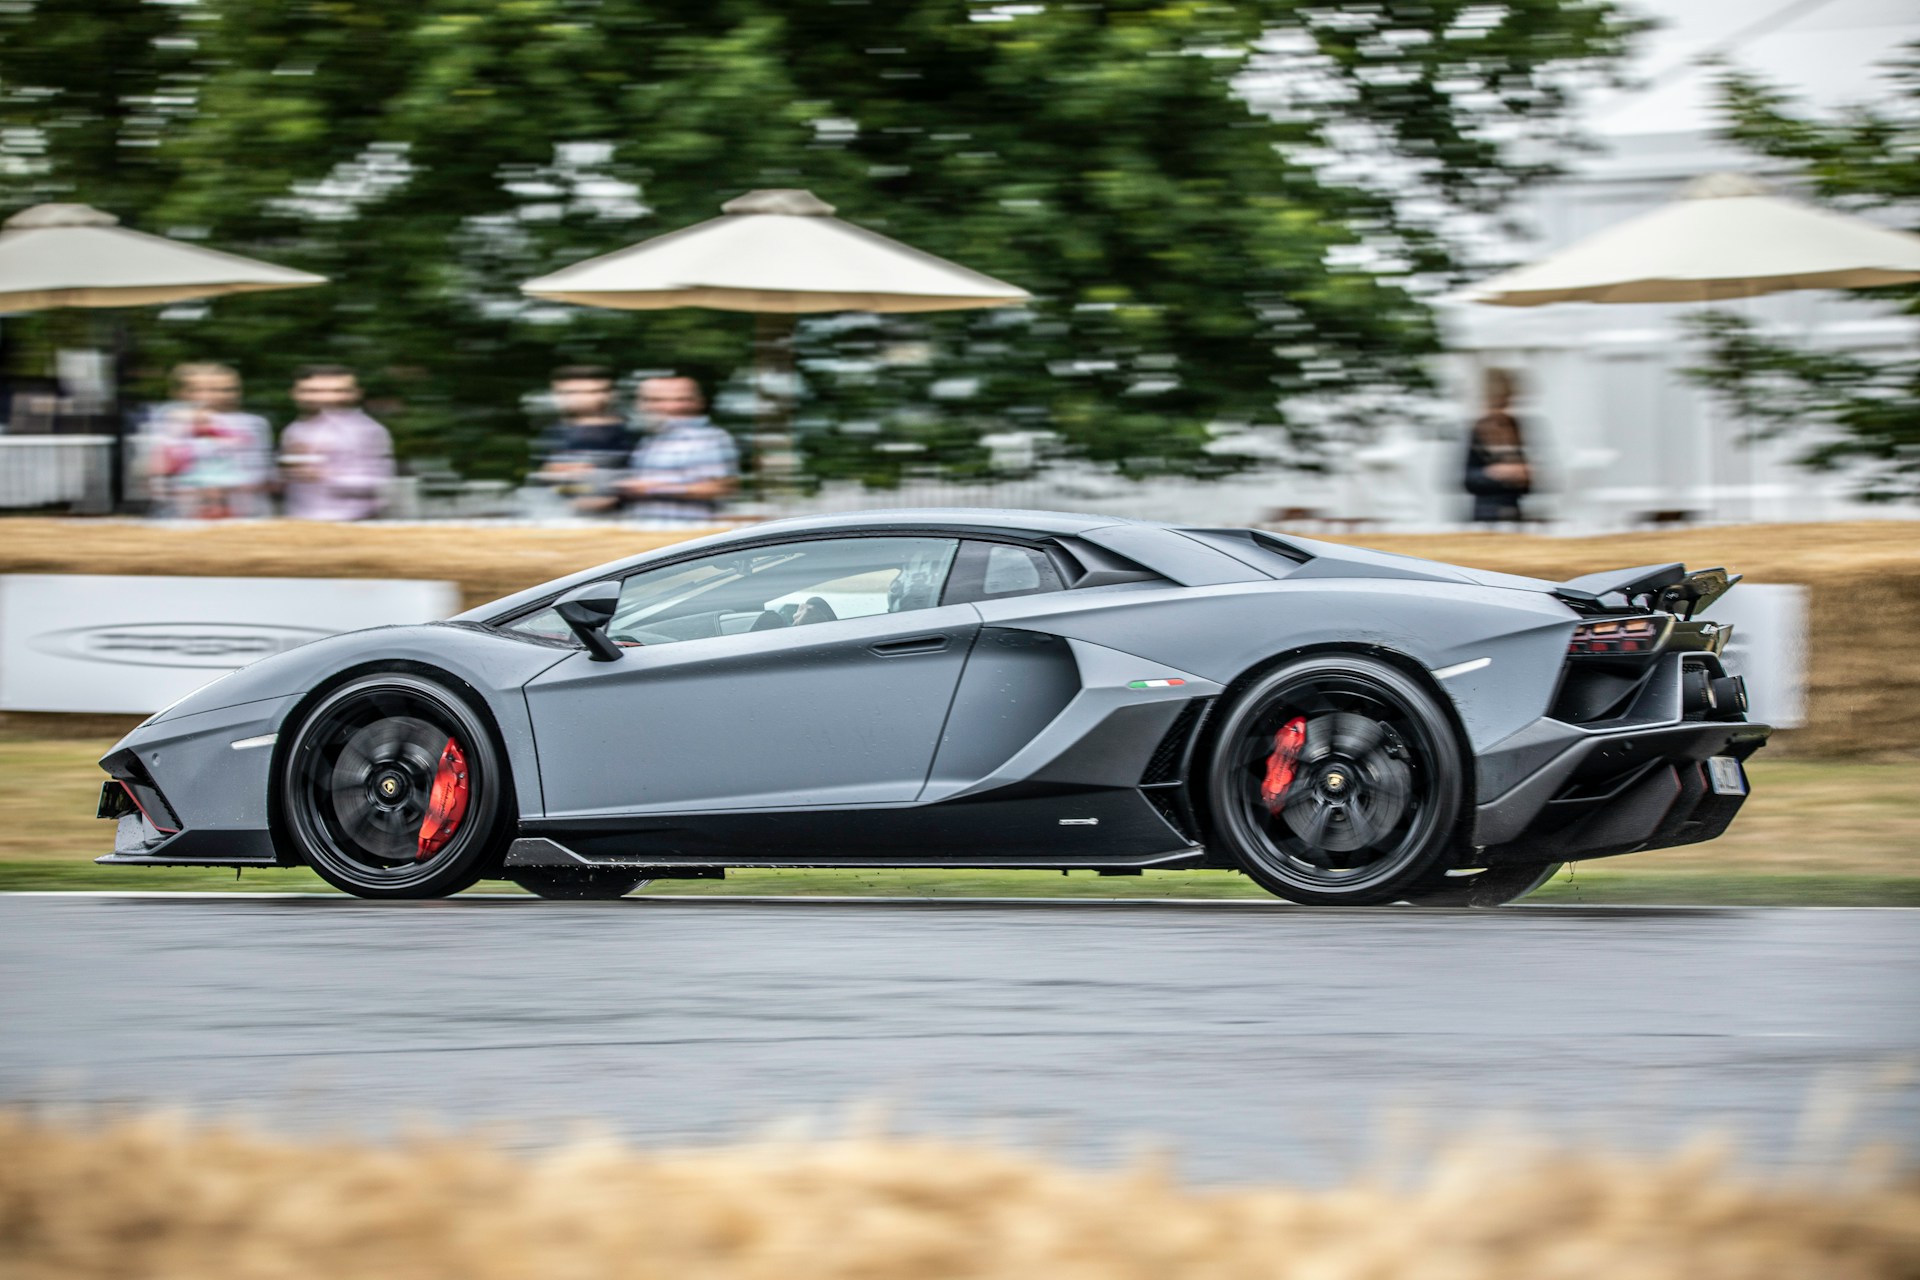 A gray Lamborghini at the Goodwood Festival of Speed, one of the best international car shows. (photo: Oliver Hayes)